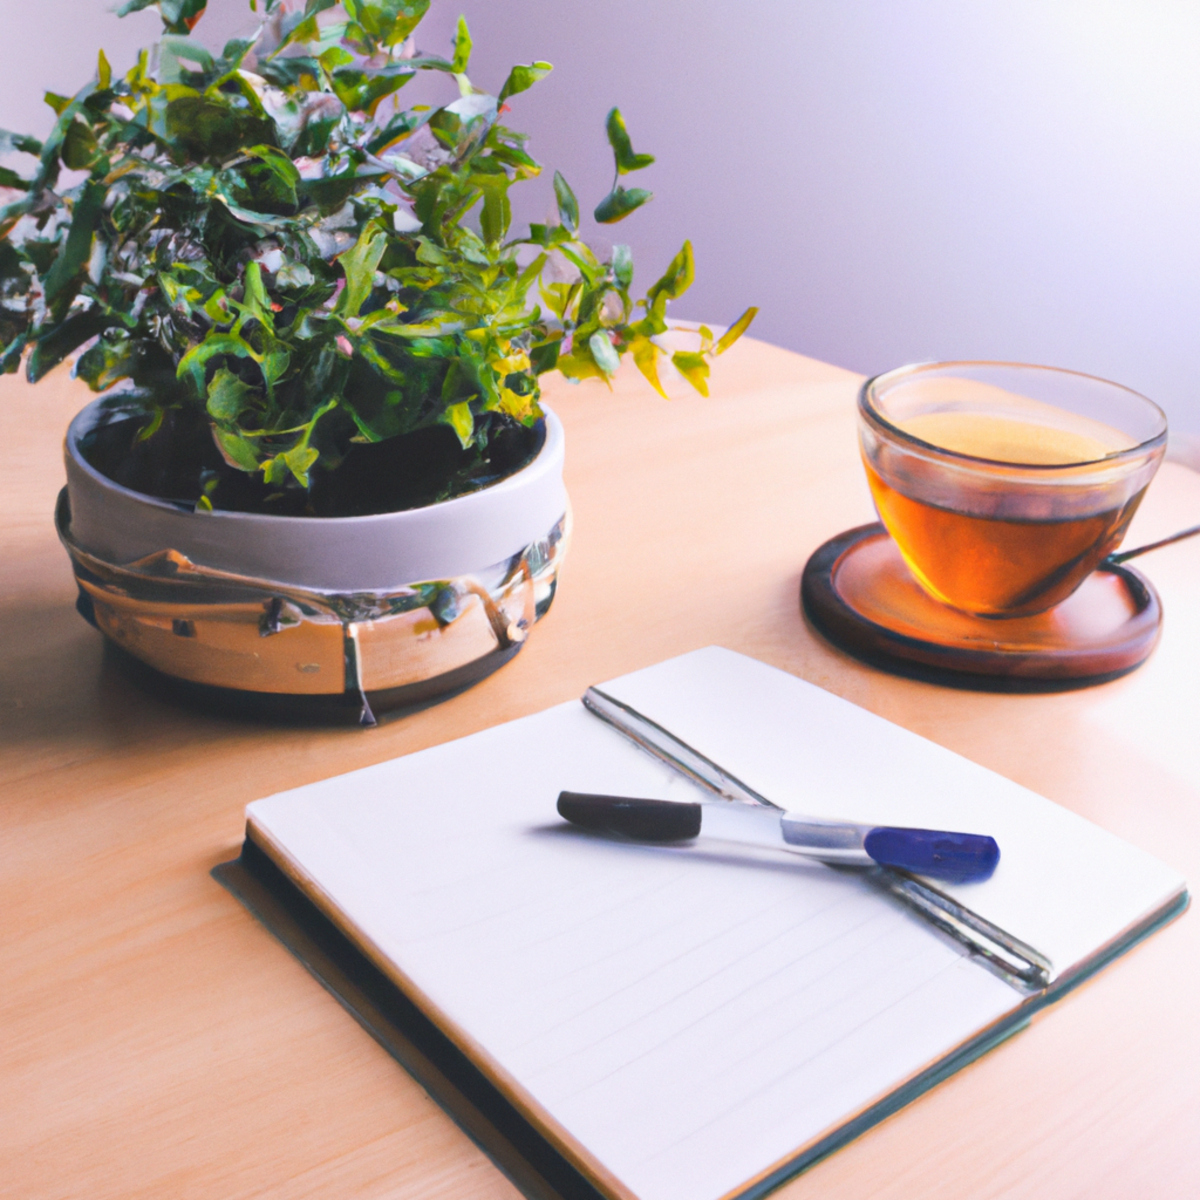 Organized desk with tea, notepad, and pen. Potted plant in background. Calming atmosphere for stress relief.